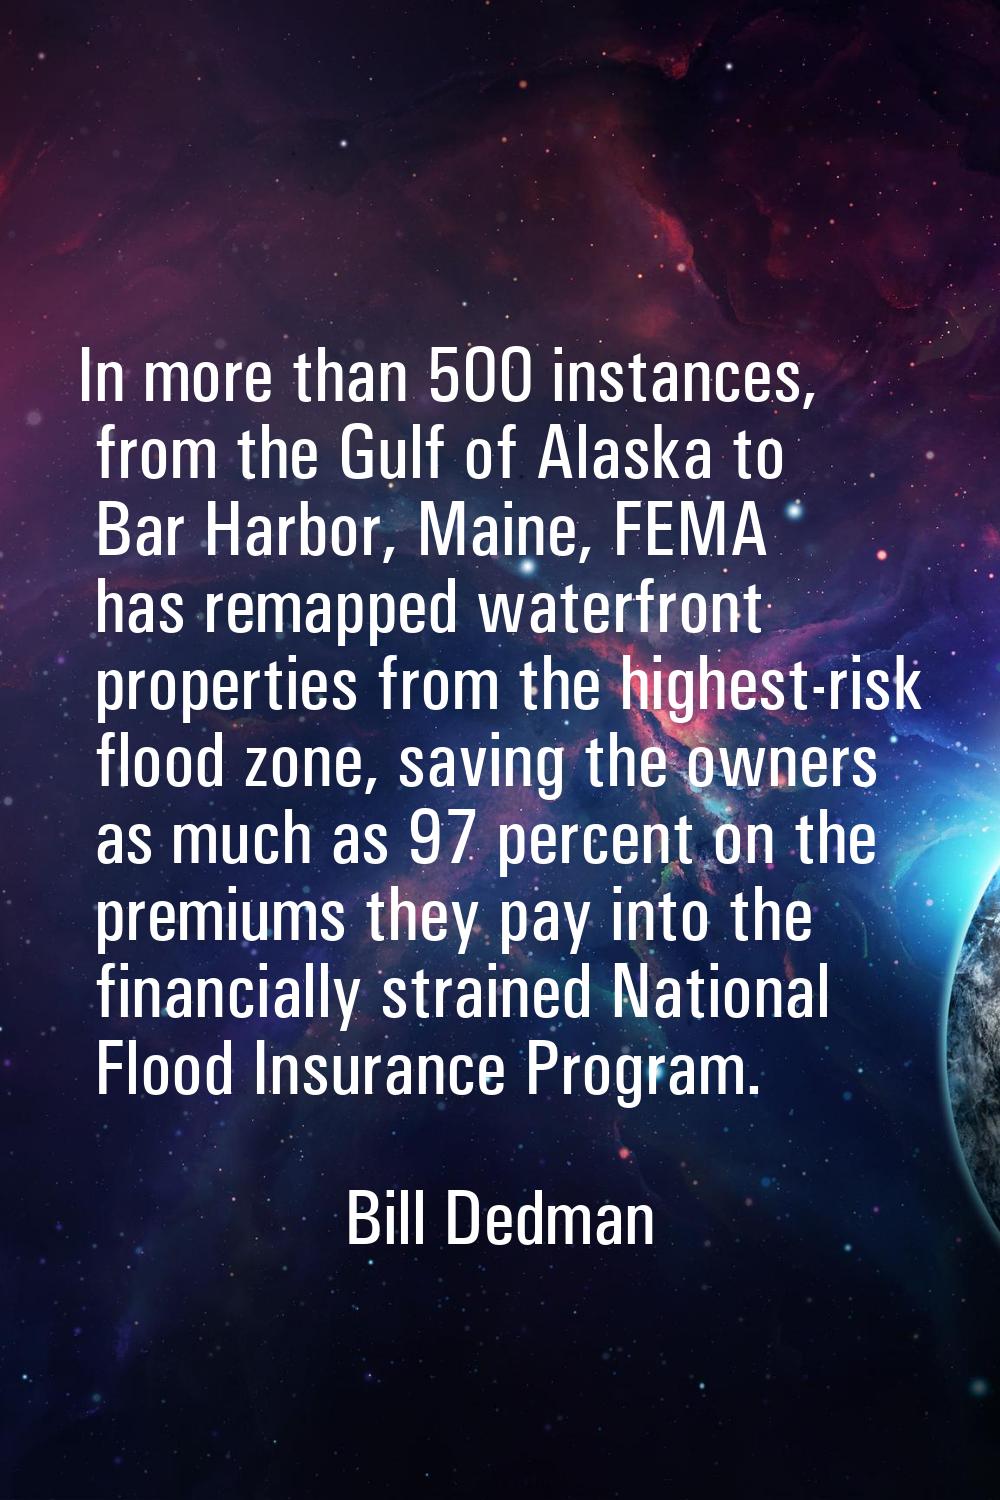 In more than 500 instances, from the Gulf of Alaska to Bar Harbor, Maine, FEMA has remapped waterfr